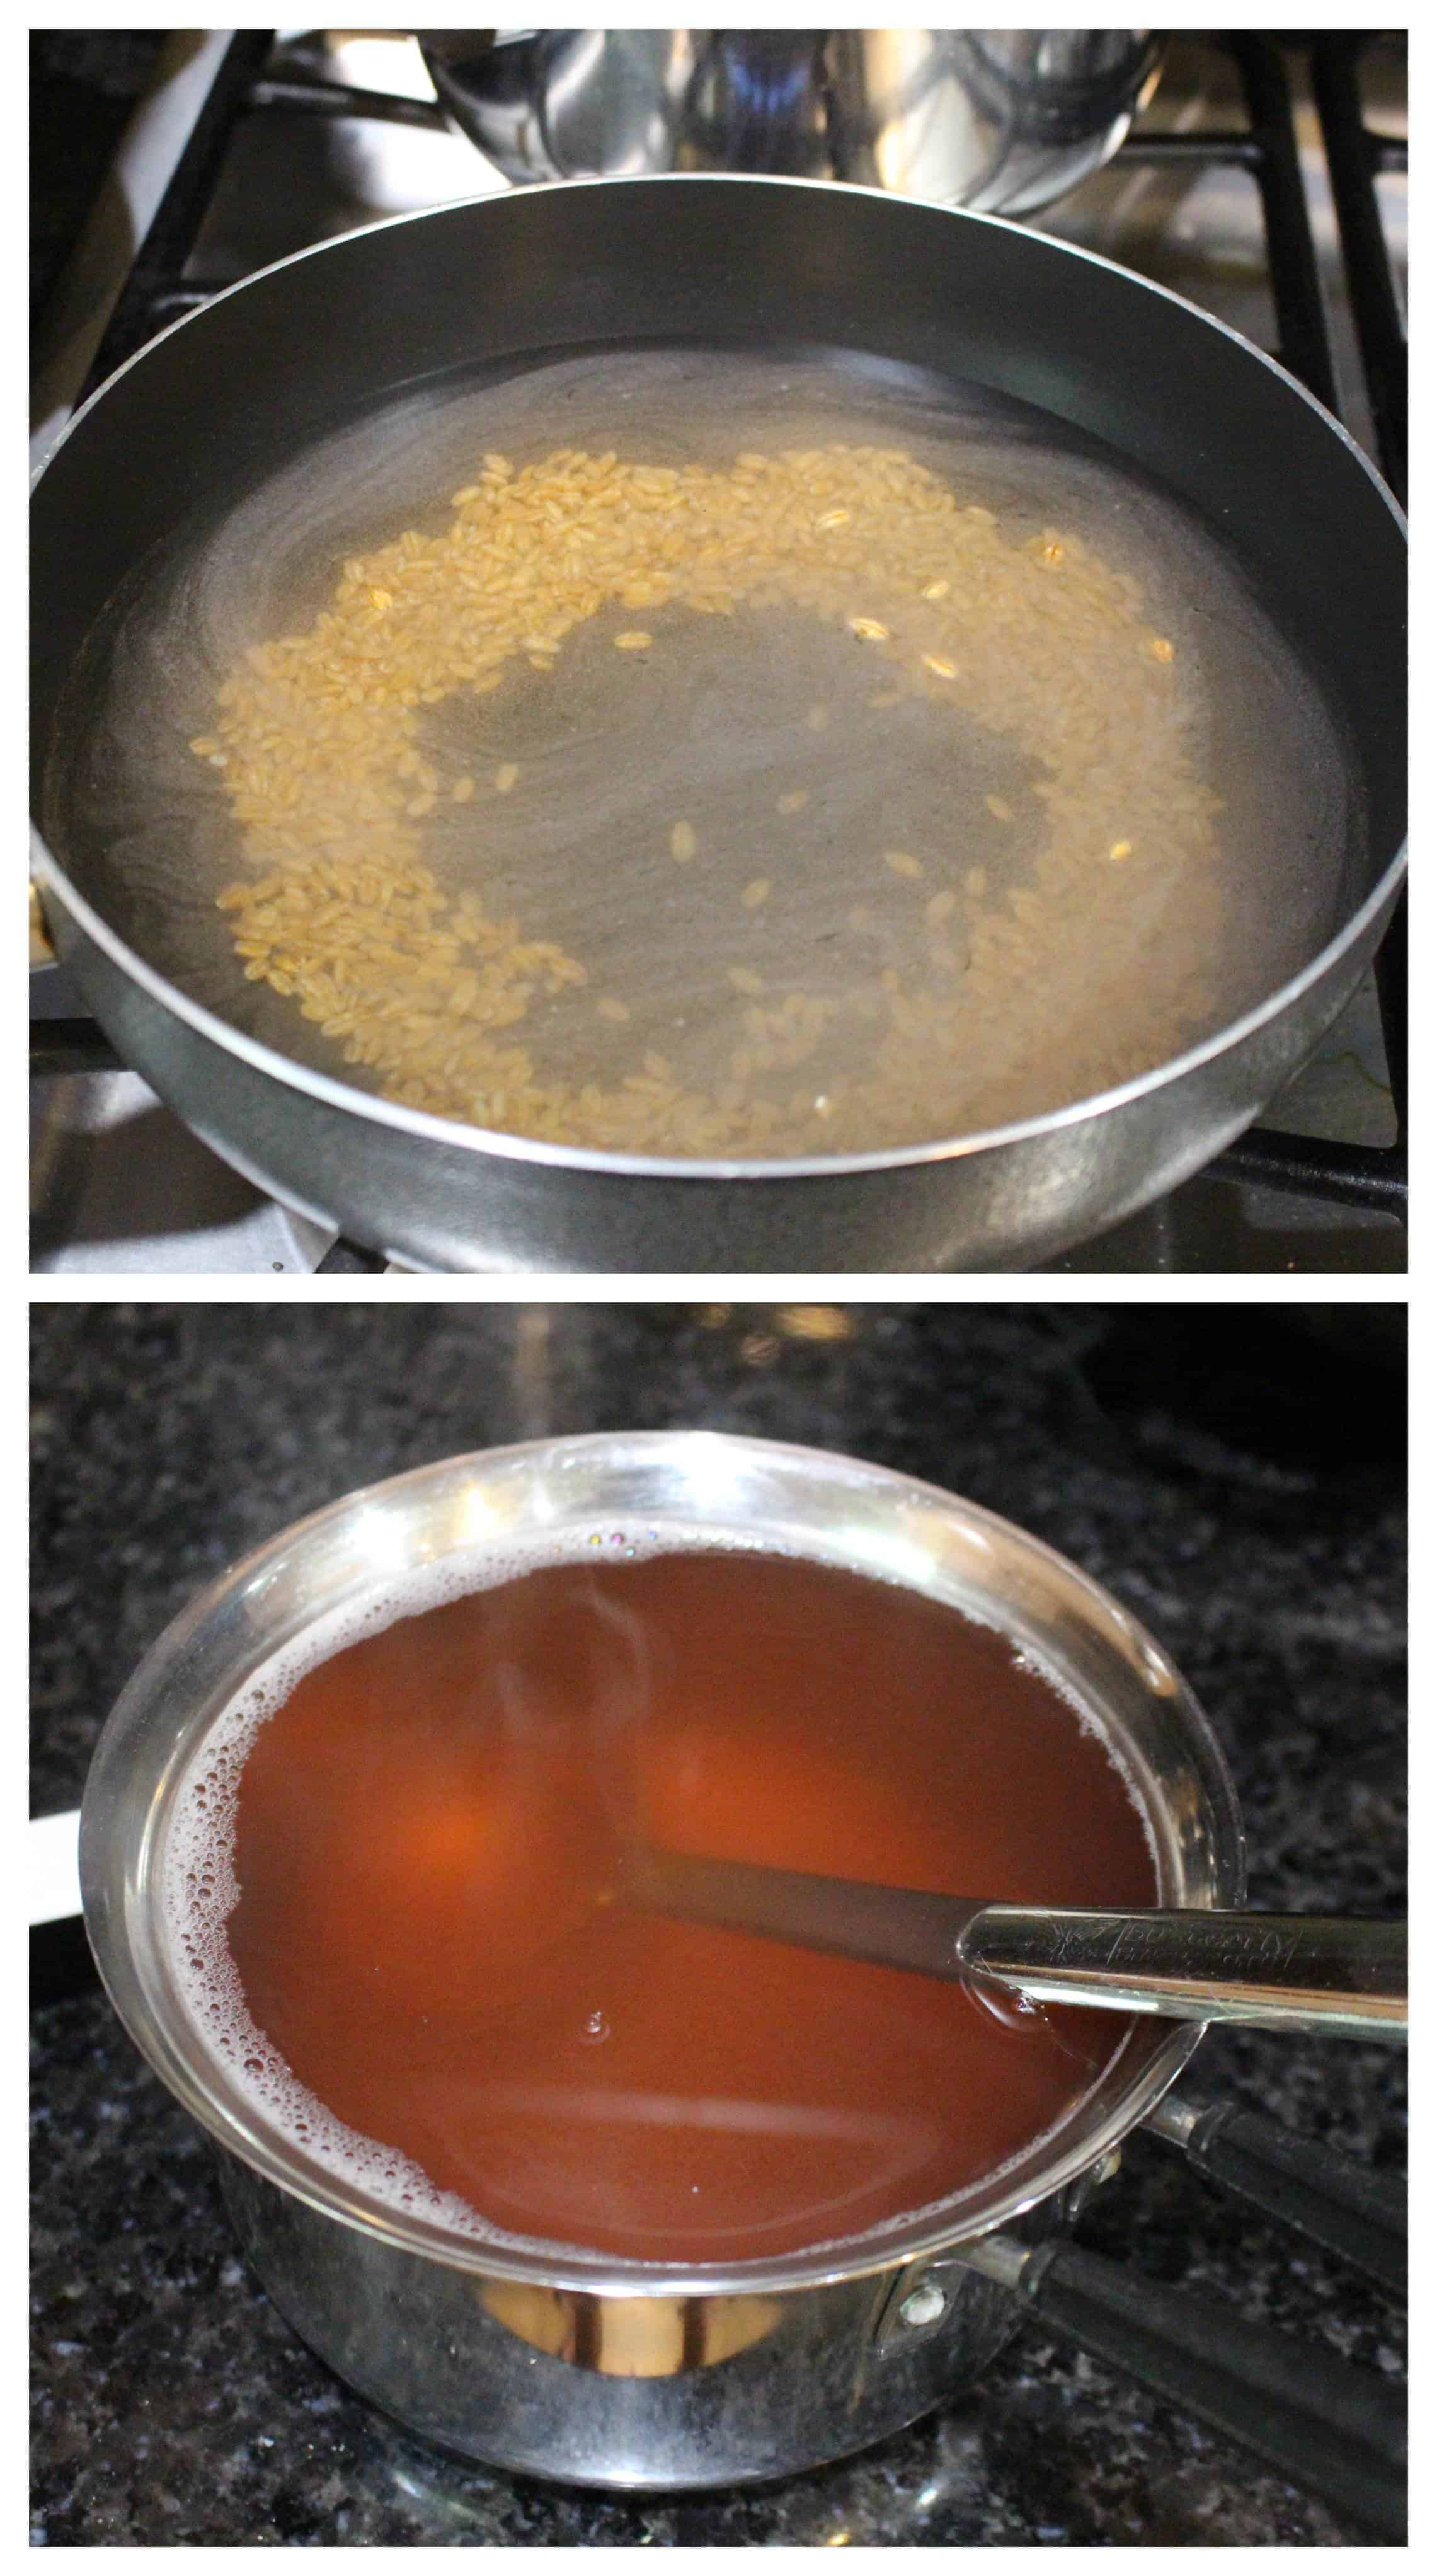 Boiling and staining Barley in water